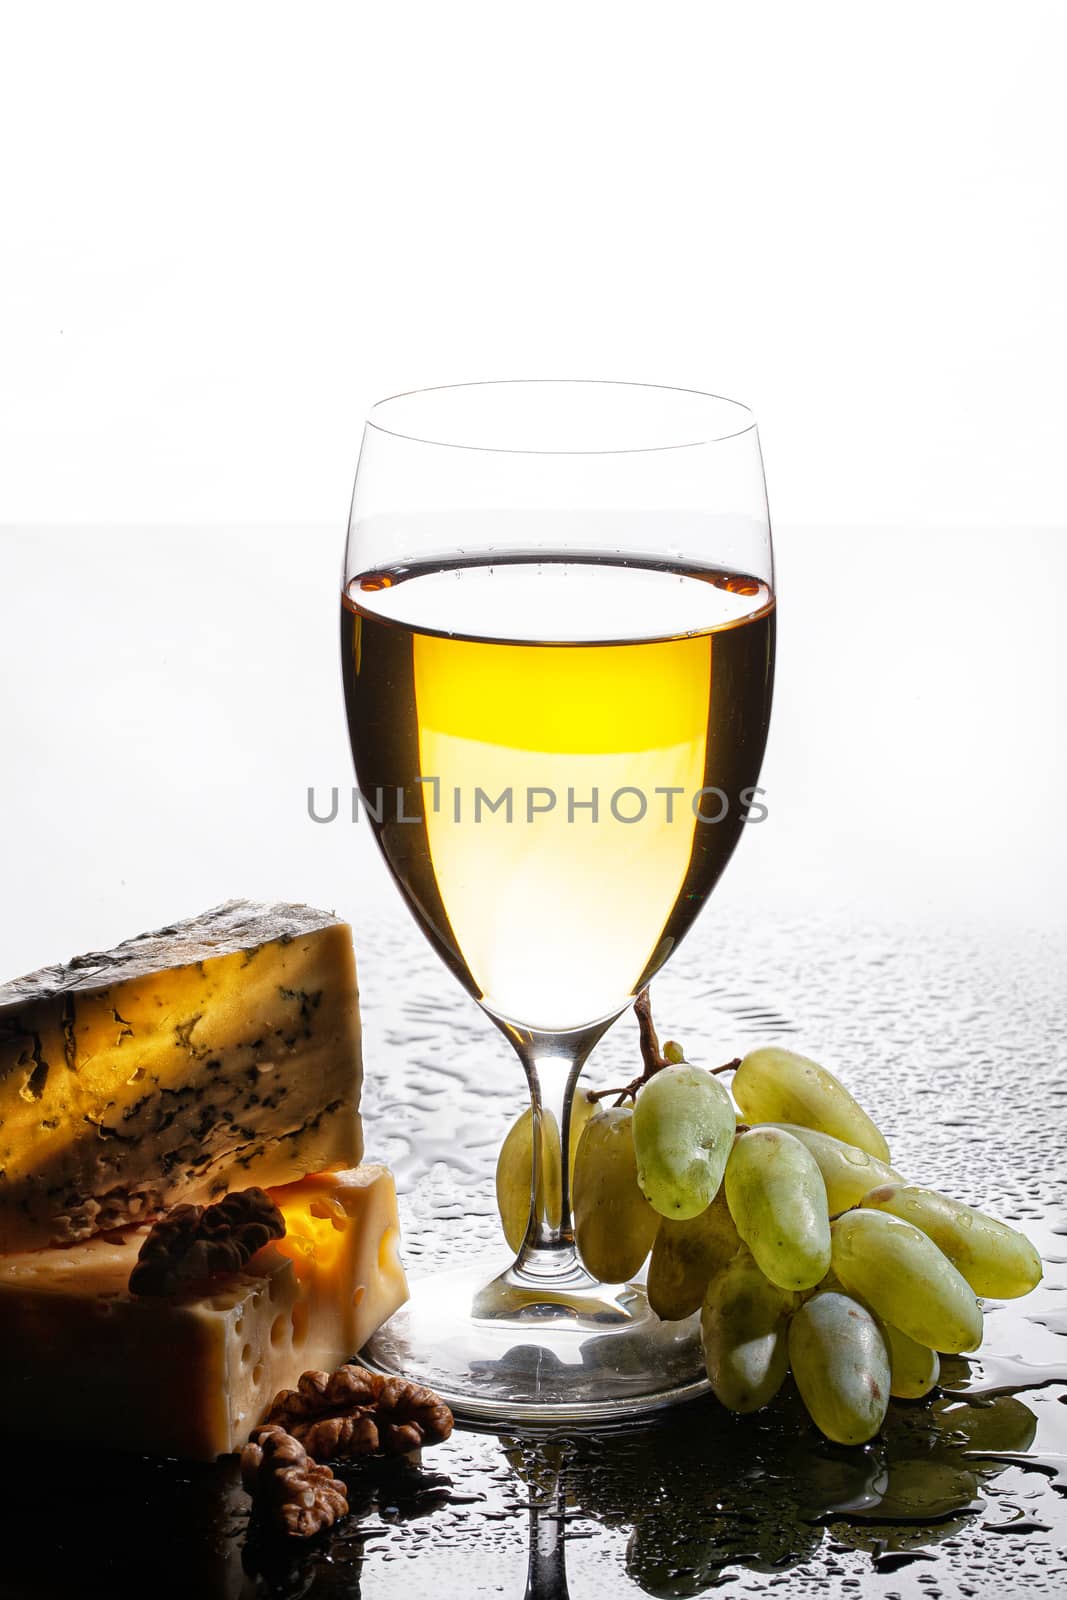 Wine, Grape And Cheese by Fotoskat